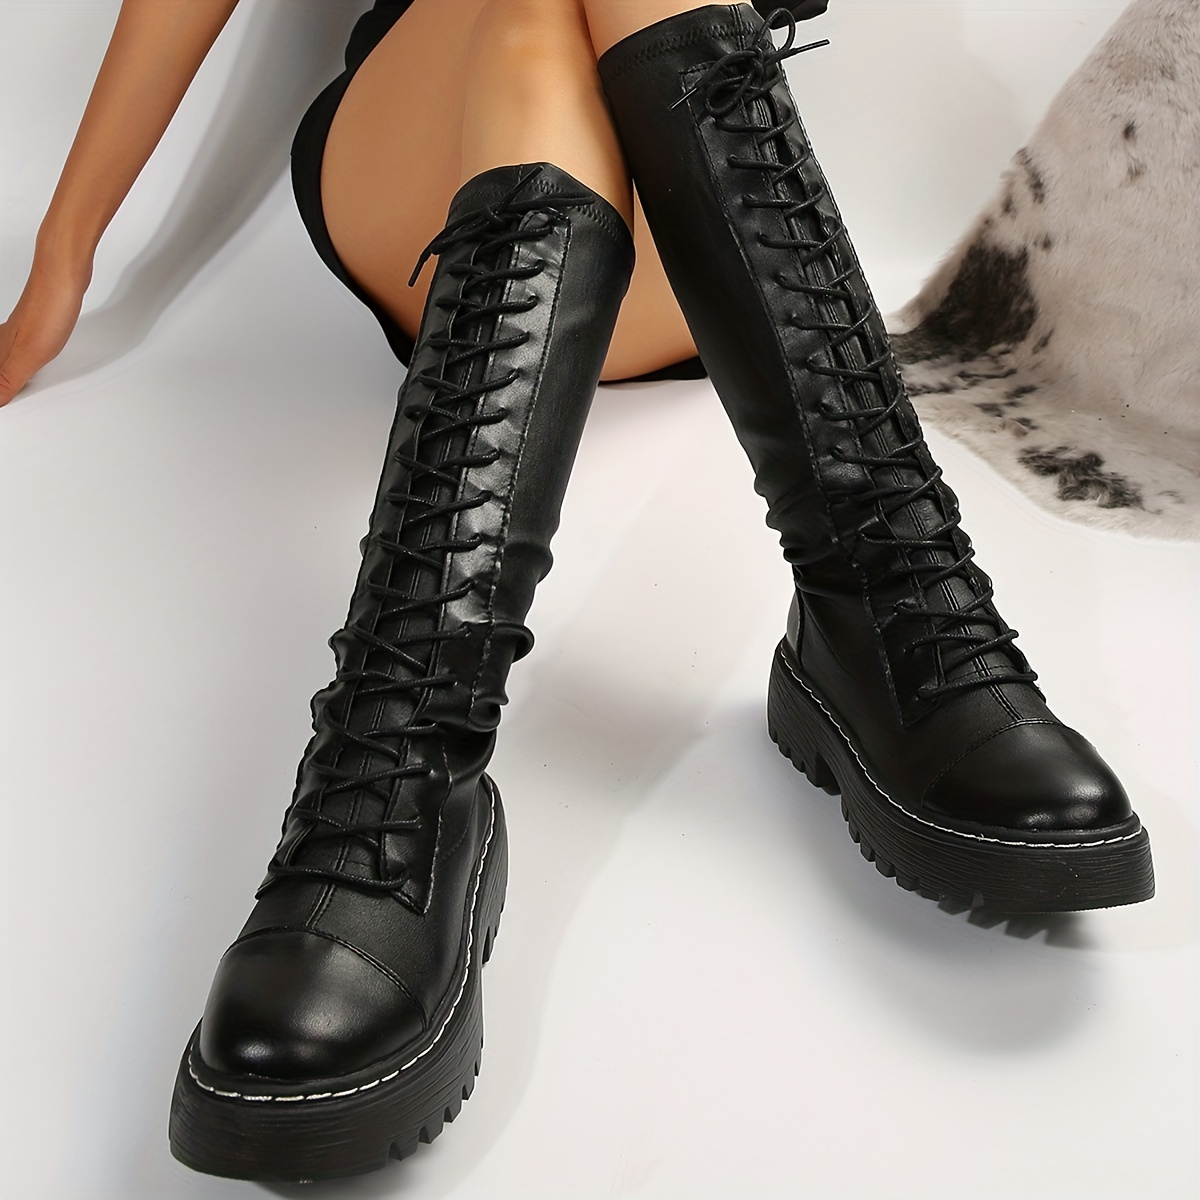 img.kwcdn.com/product/lace-up-knight-boots/d69d2f1